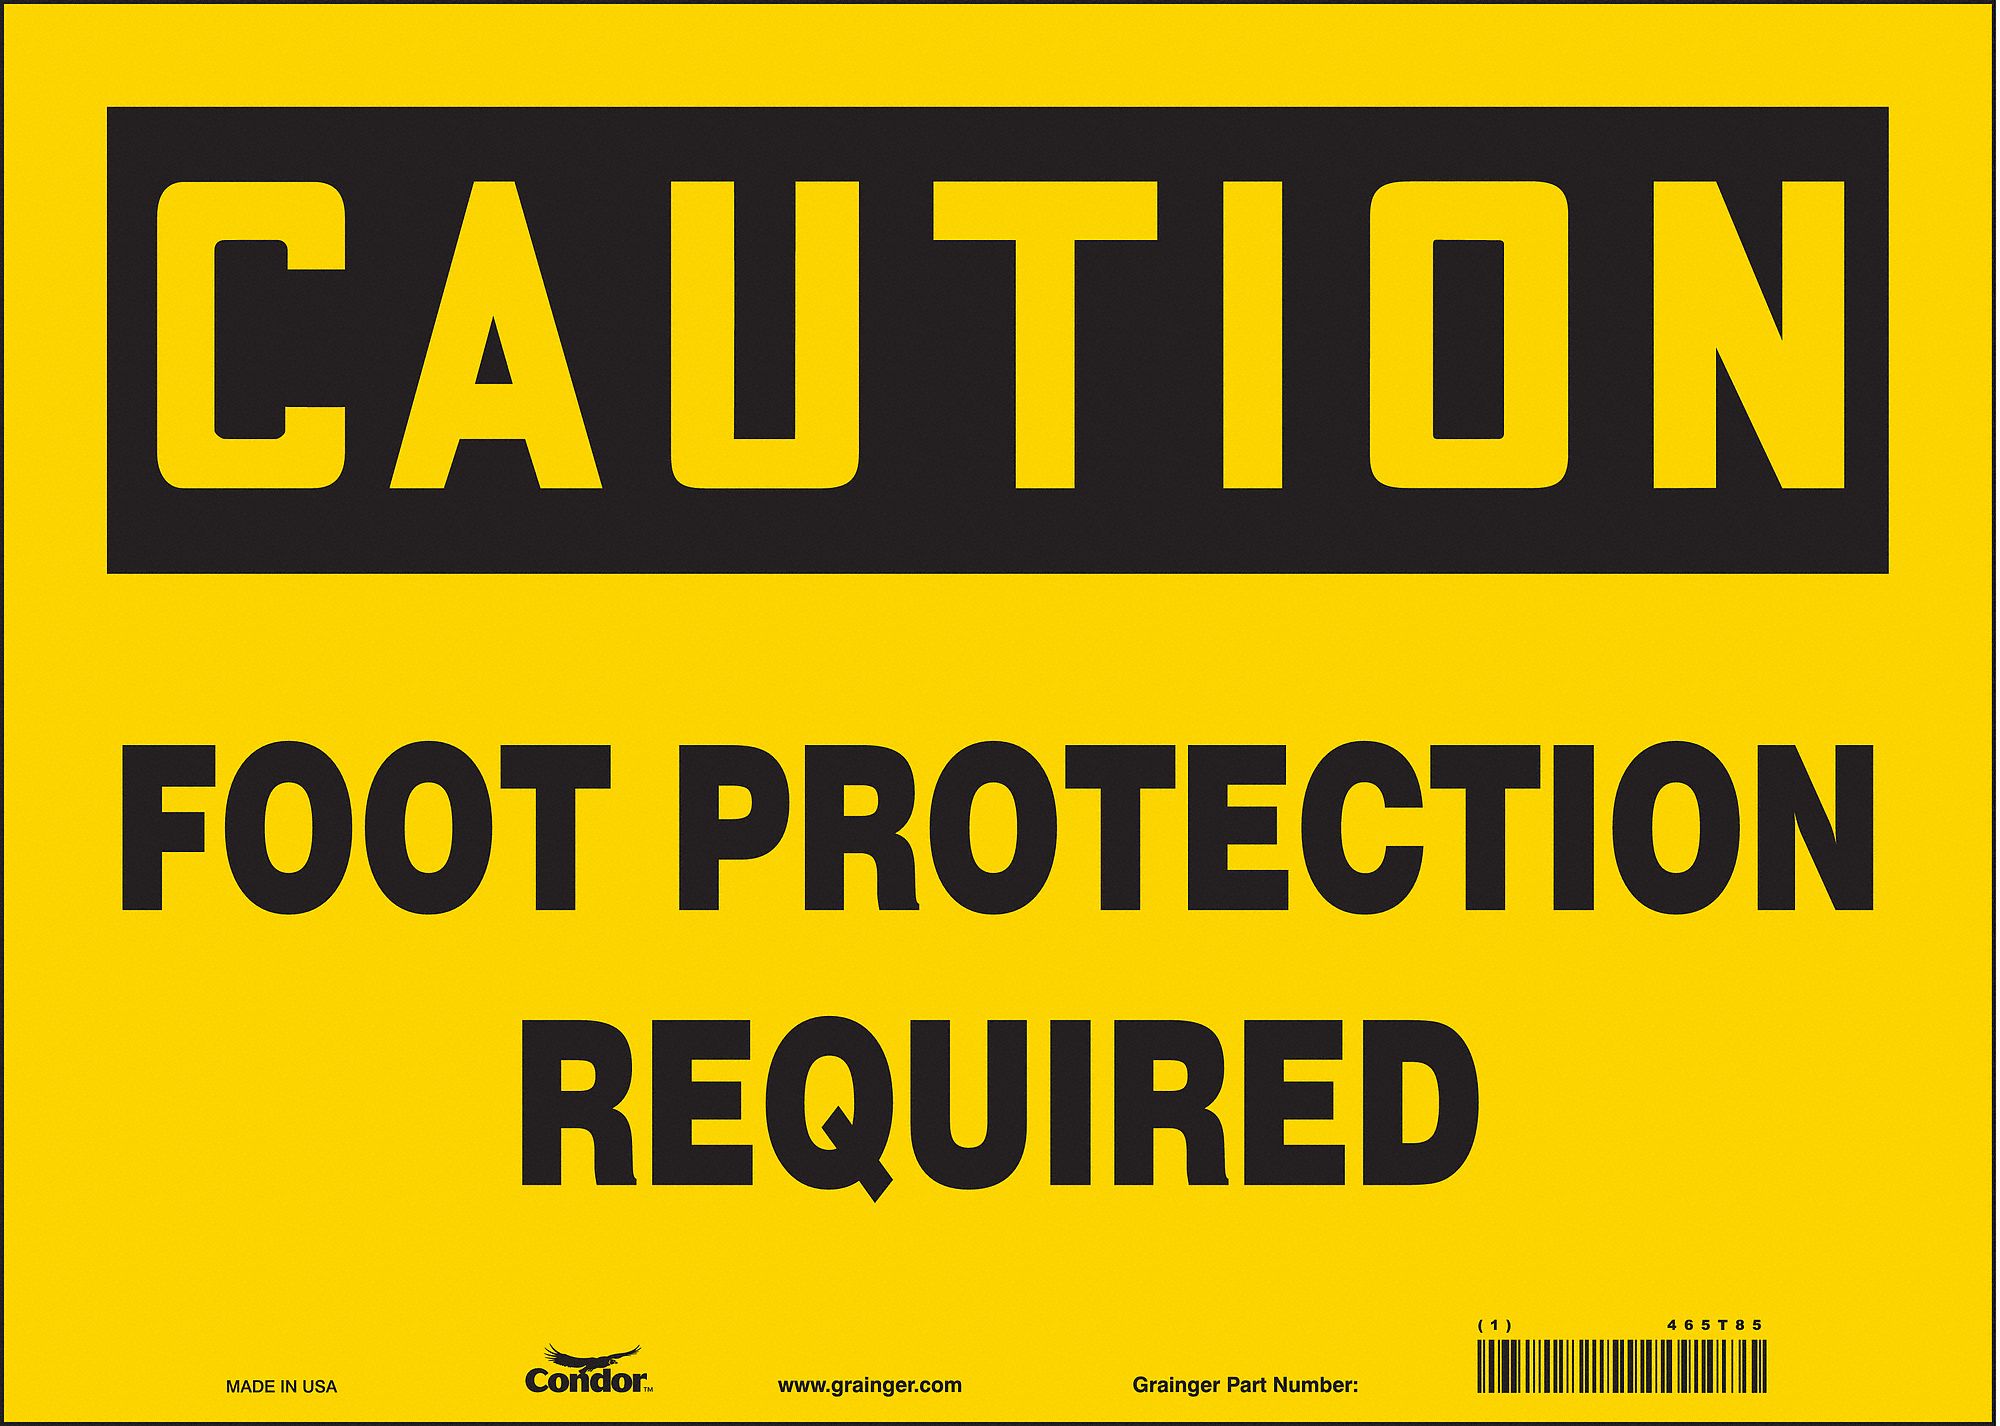 Vinyl, Adhesive Sign Mounting, Safety Sign - 465T85|465T85 - Grainger